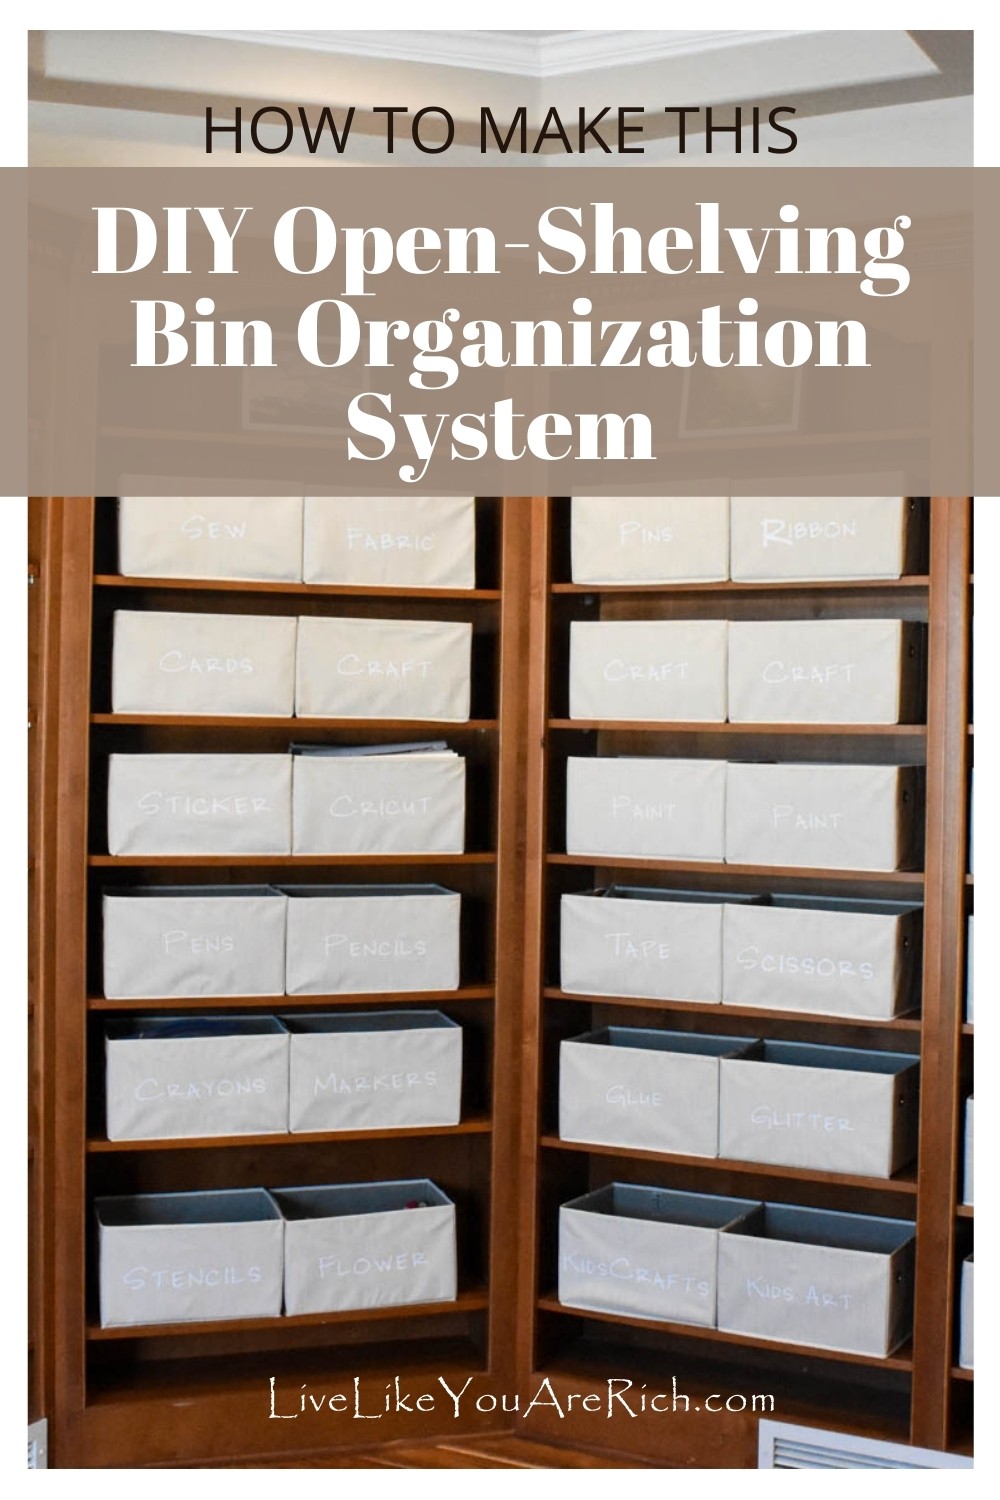 While renovating my office, I though of multiple ways to organize our open shelves/built-in shelving. Ultimately, I decided on this DIY open Shelving Bin Organization system. I have loved it! With my DIY open shelving bin labeling system, I can see what I have in each tote very easily. This system has been convenient, aesthetically pleasing and efficient.